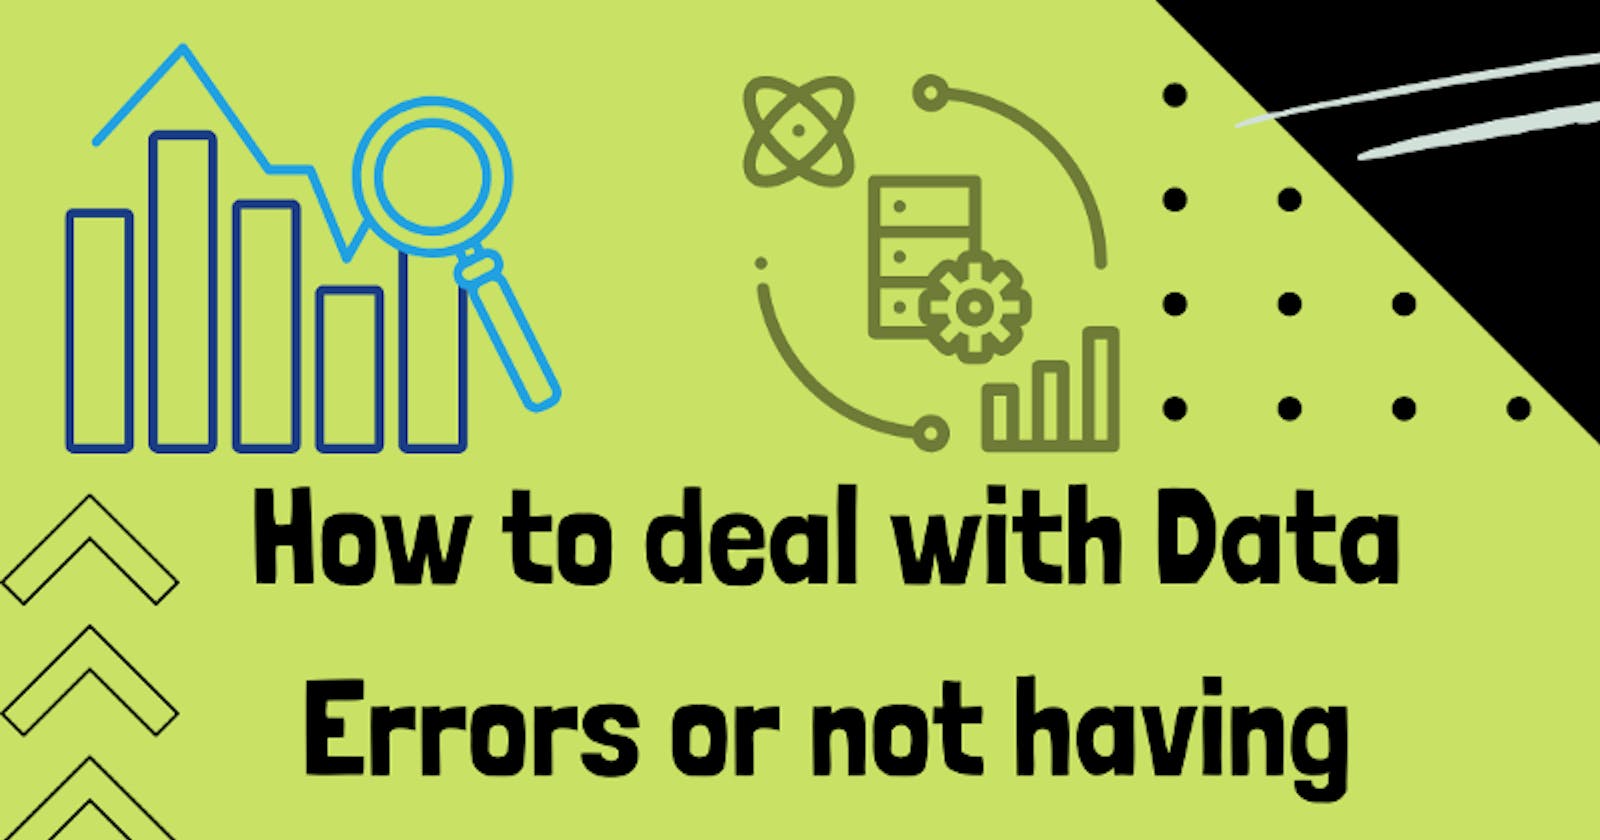 How to deal with Data Errors or not having enough Data